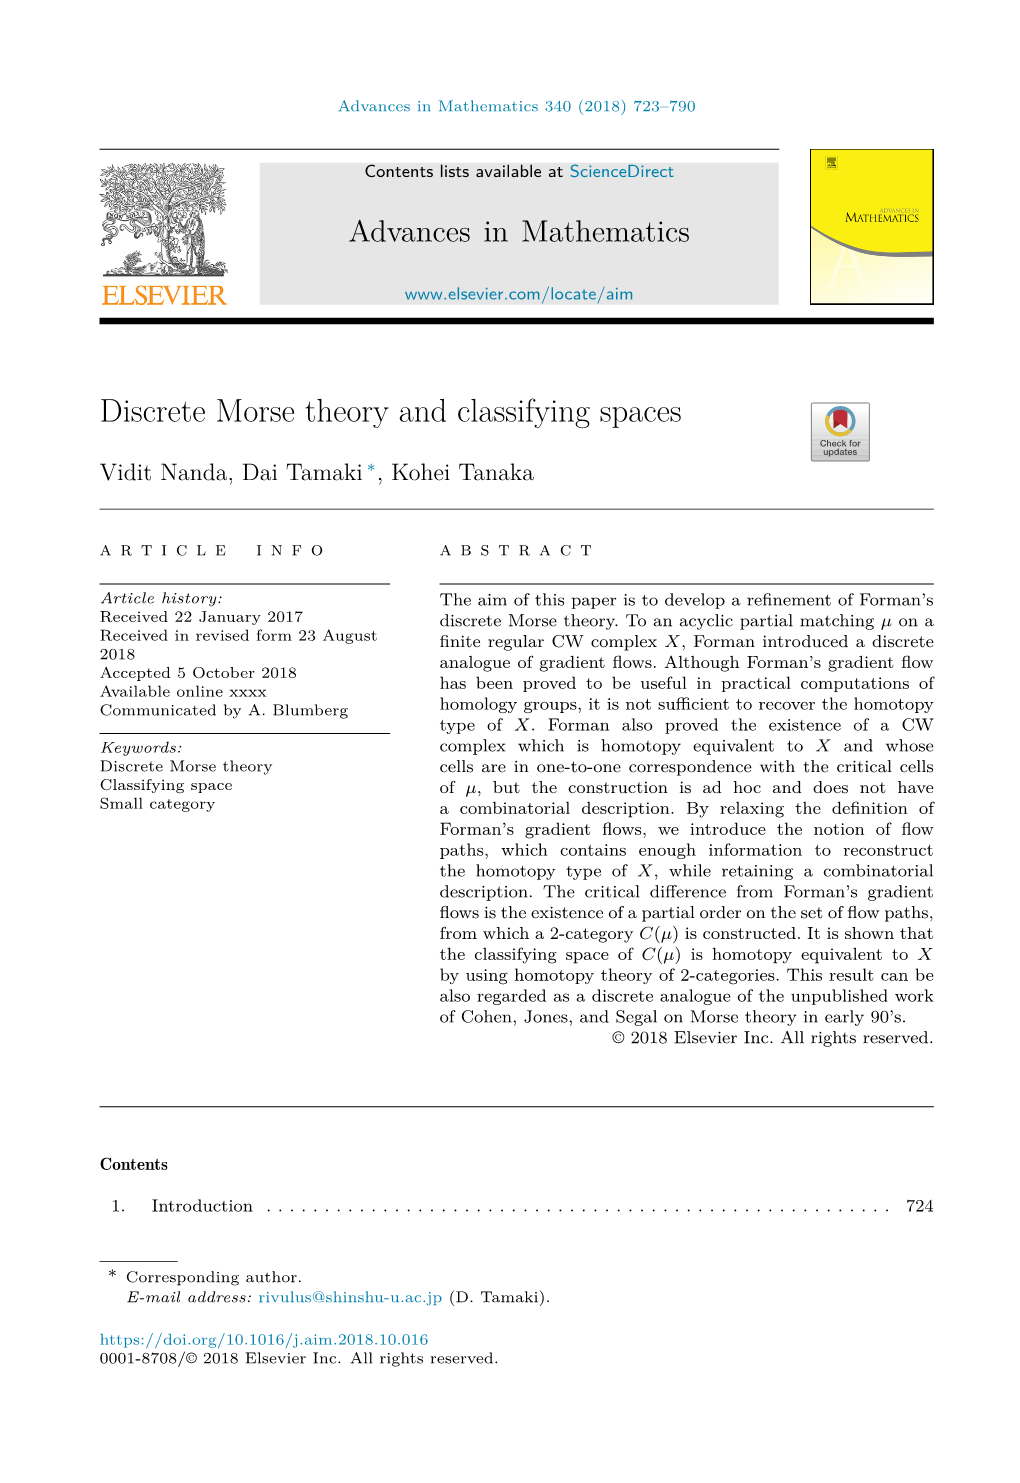 Discrete Morse Theory and Classifying Spaces